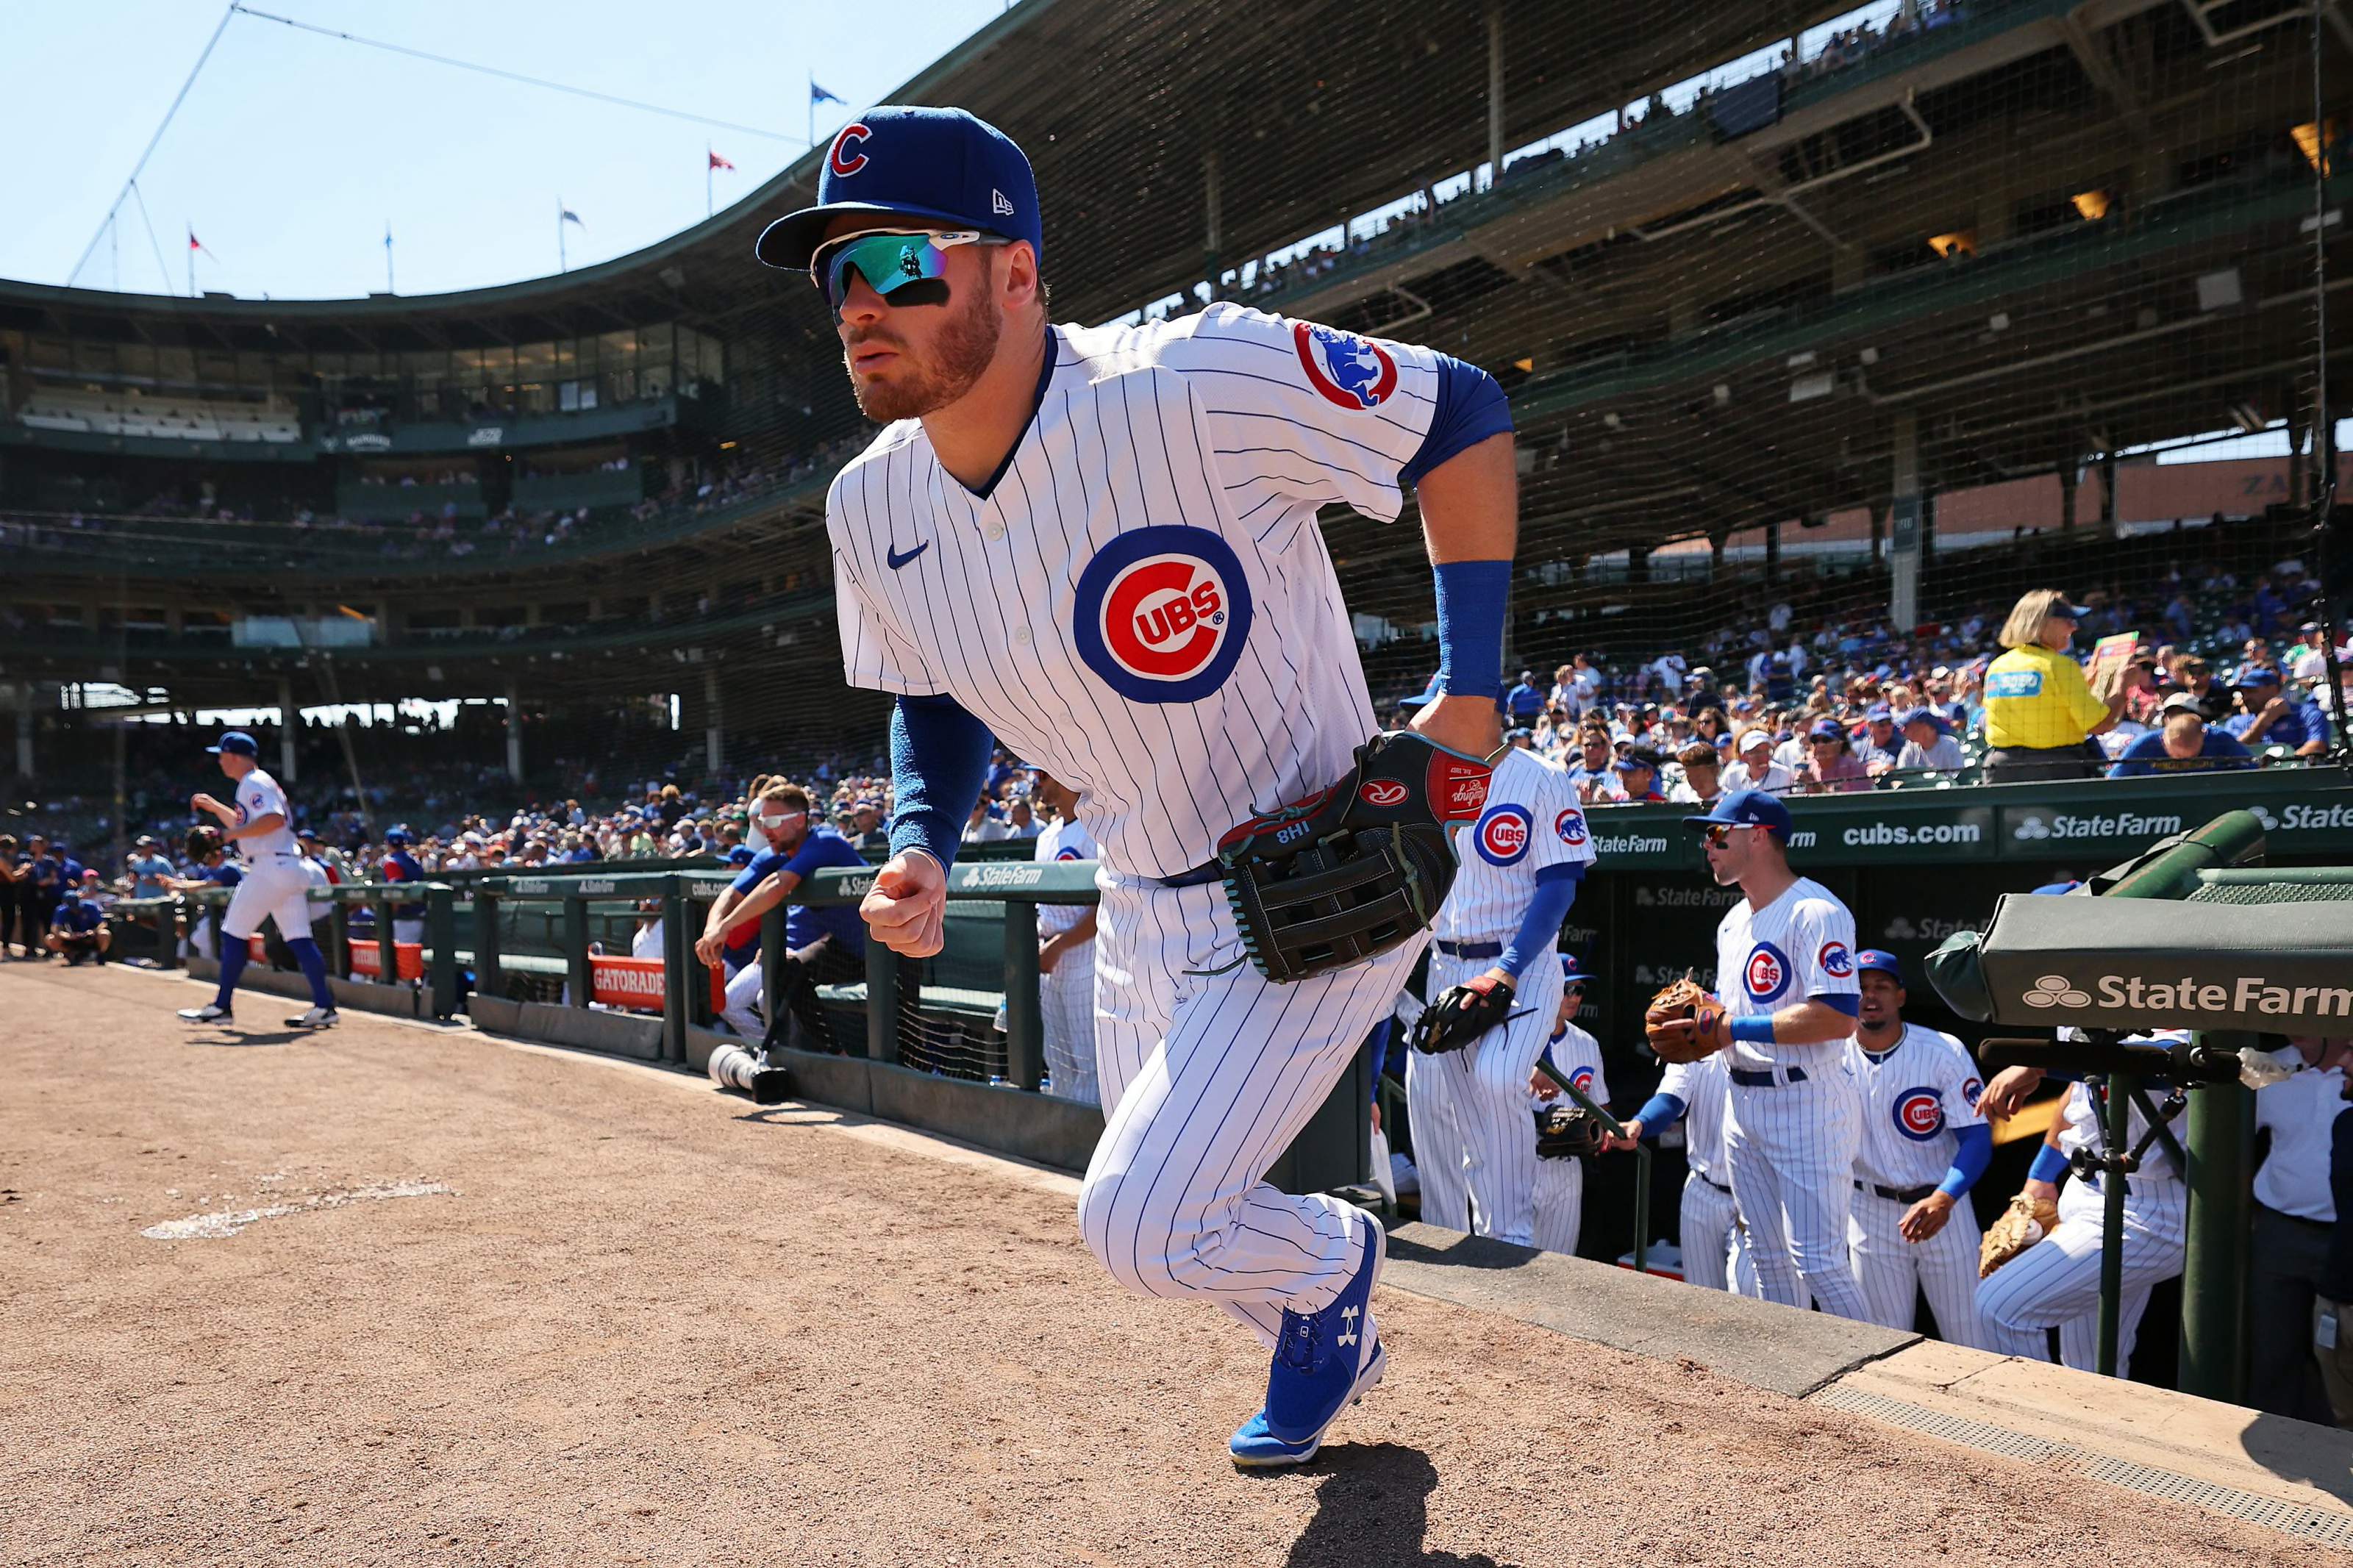 Cubs' Ian Happ Works With Artist to Capture Wrigley Field, Chicago News